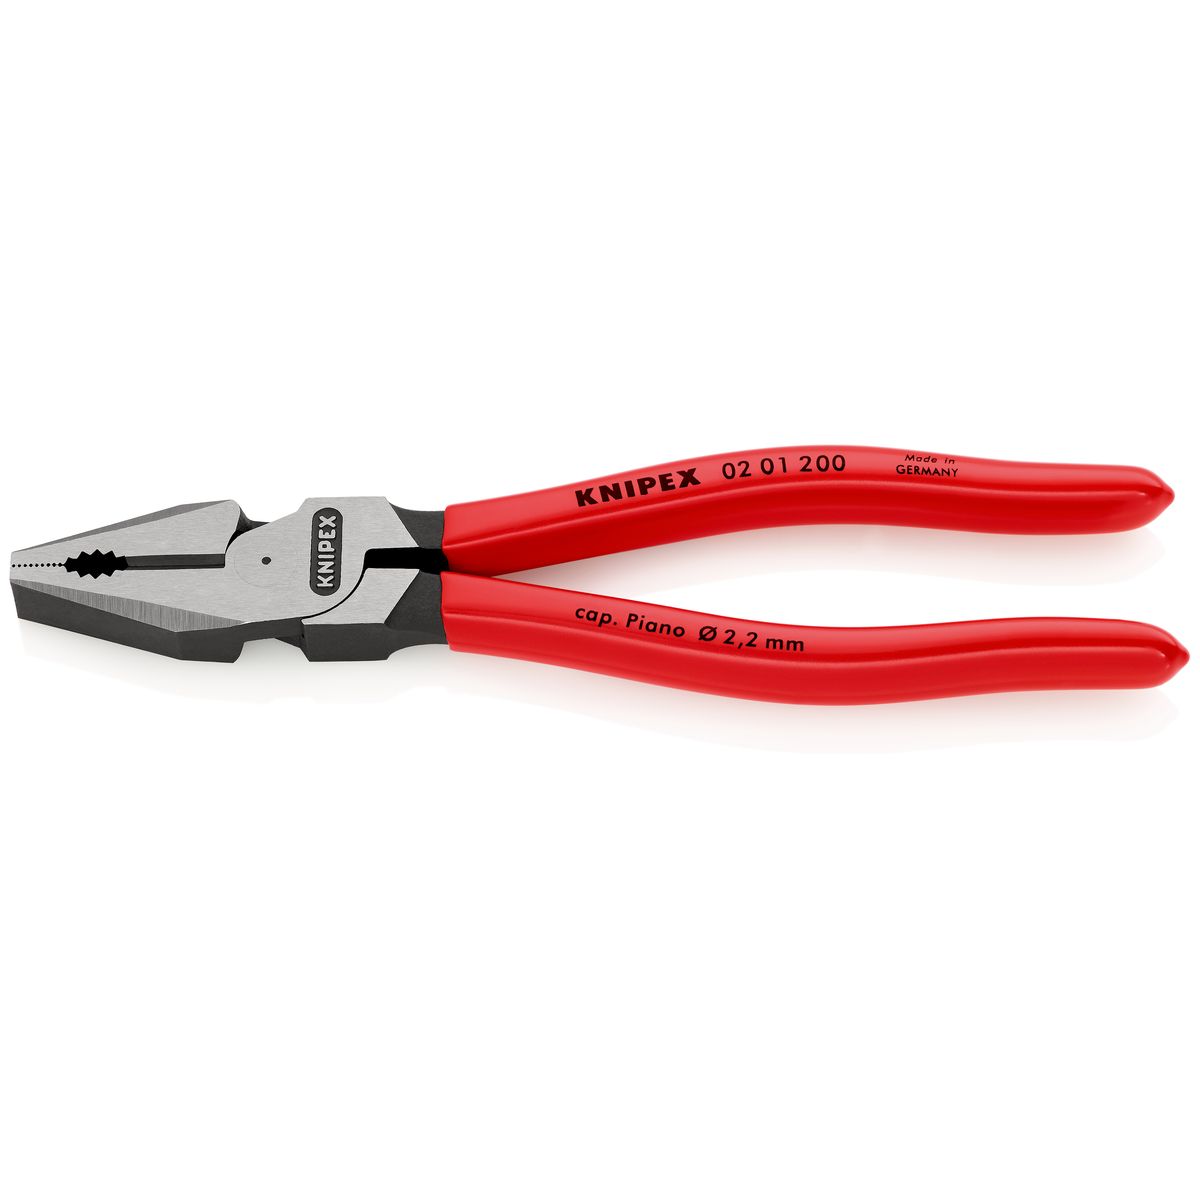 COMBINATION PLIERS 0201200 Knipex